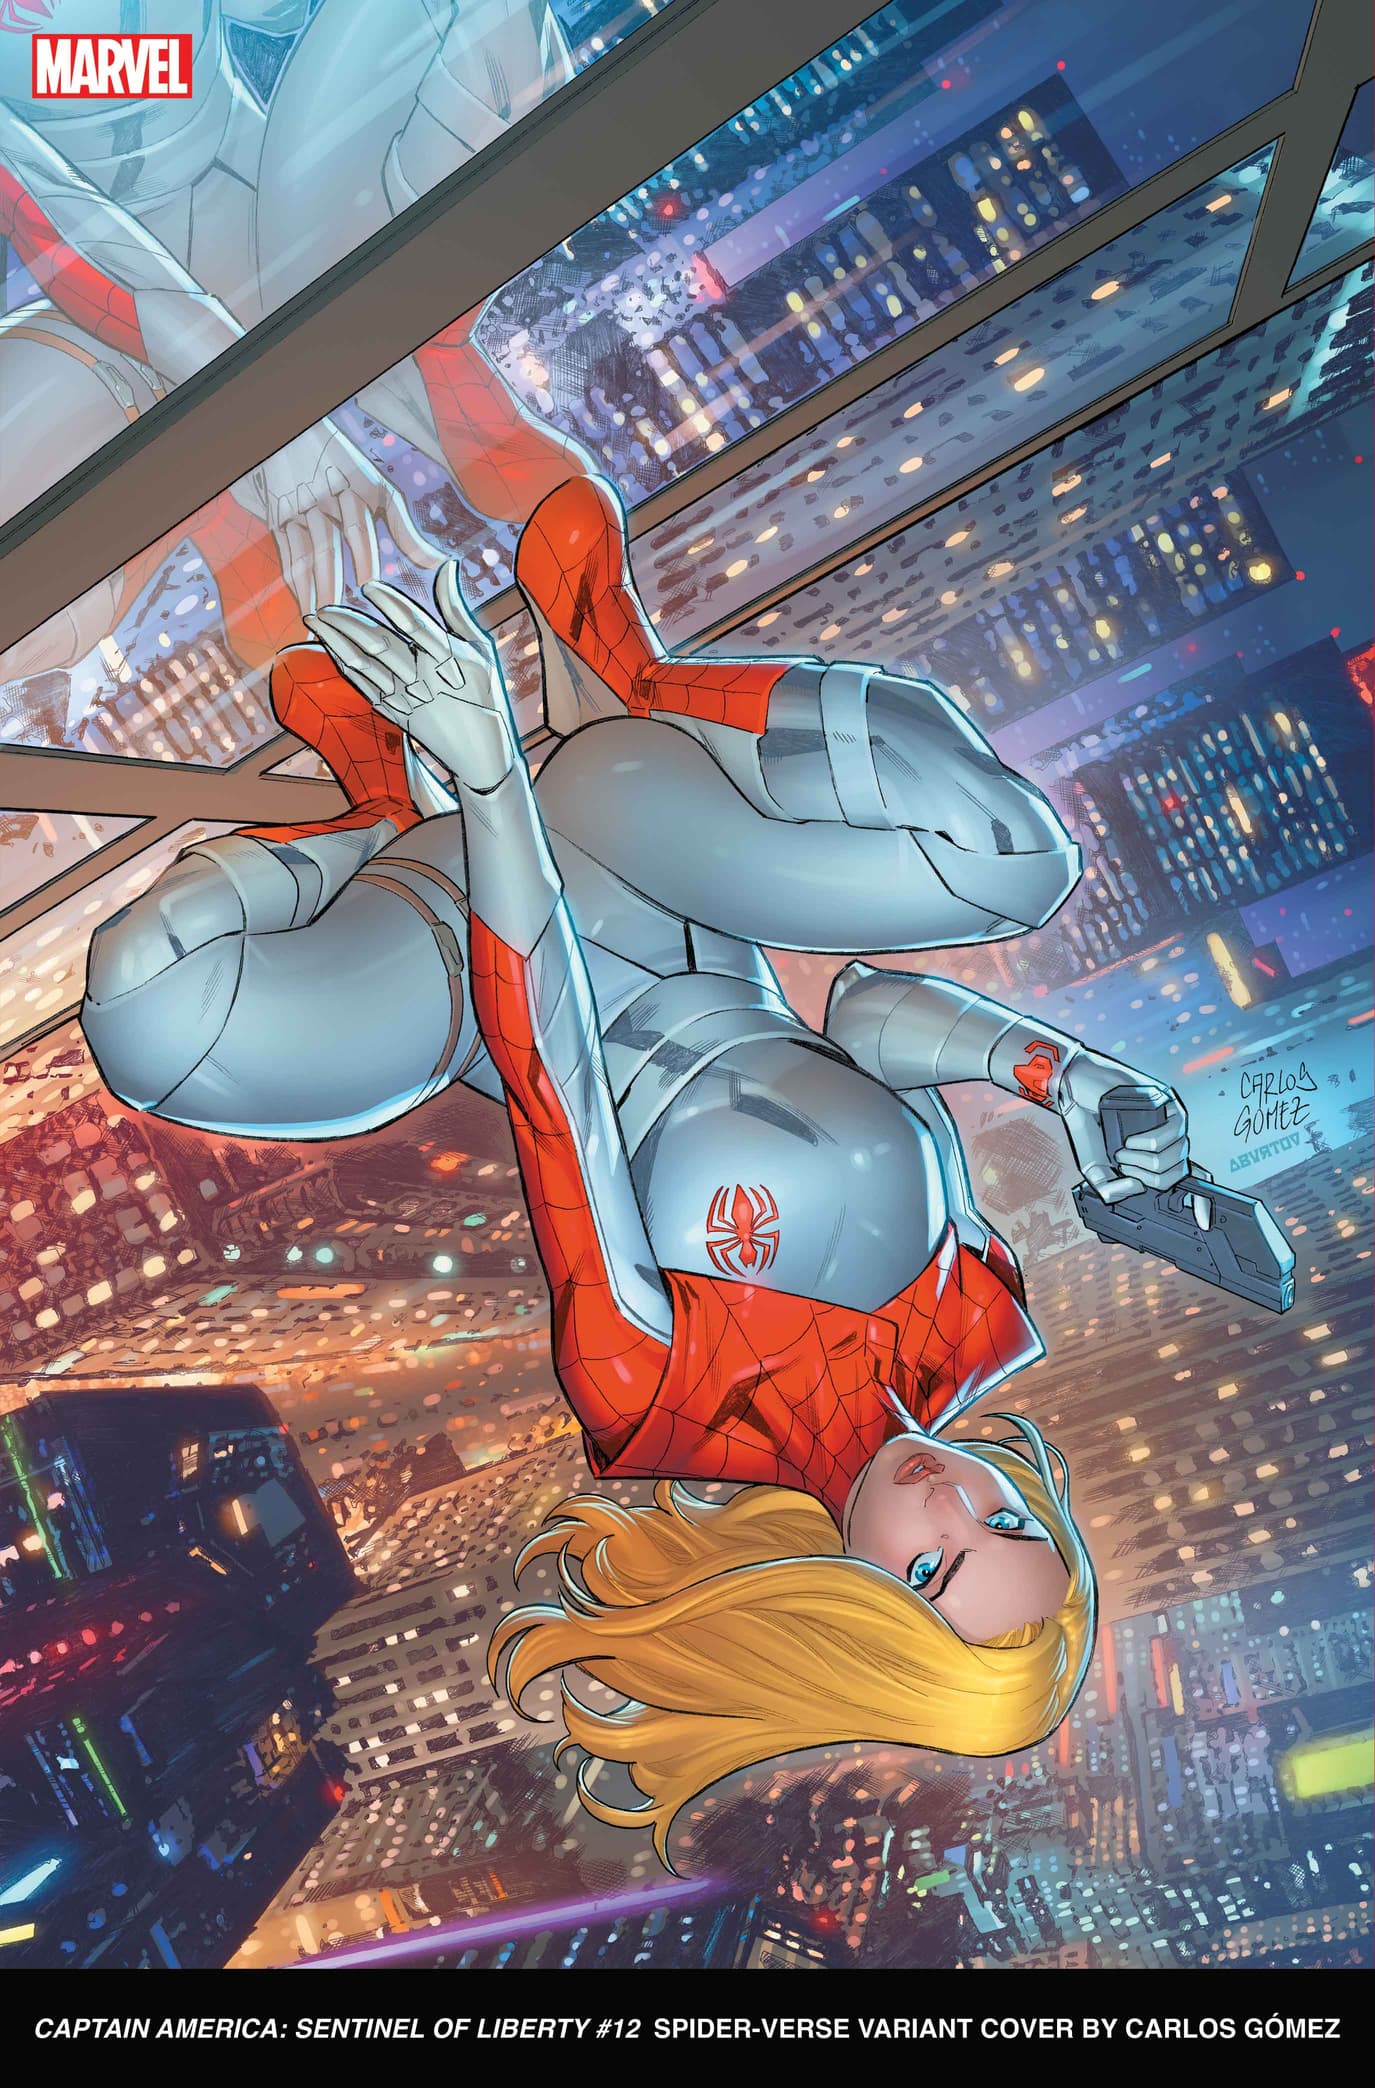 Marvel Heroes Swing into the Spider-Verse in New Variant Covers | Marvel